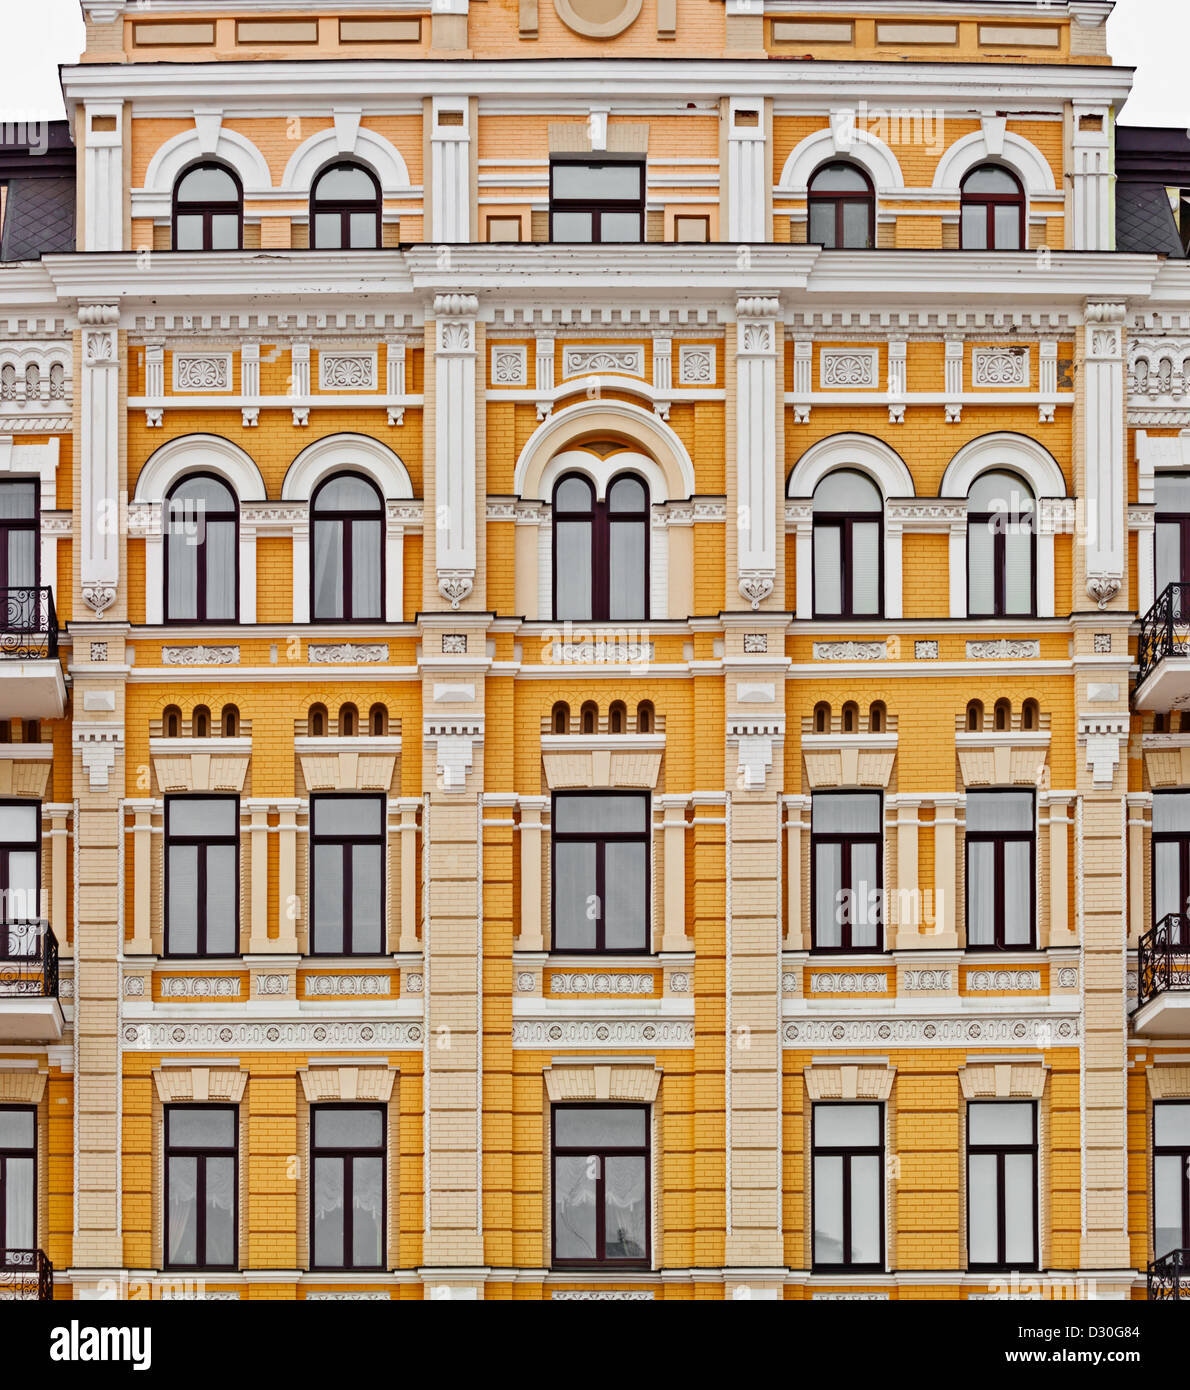 Exterior of european yellow building with many windows, neoclassic architecture Stock Photo